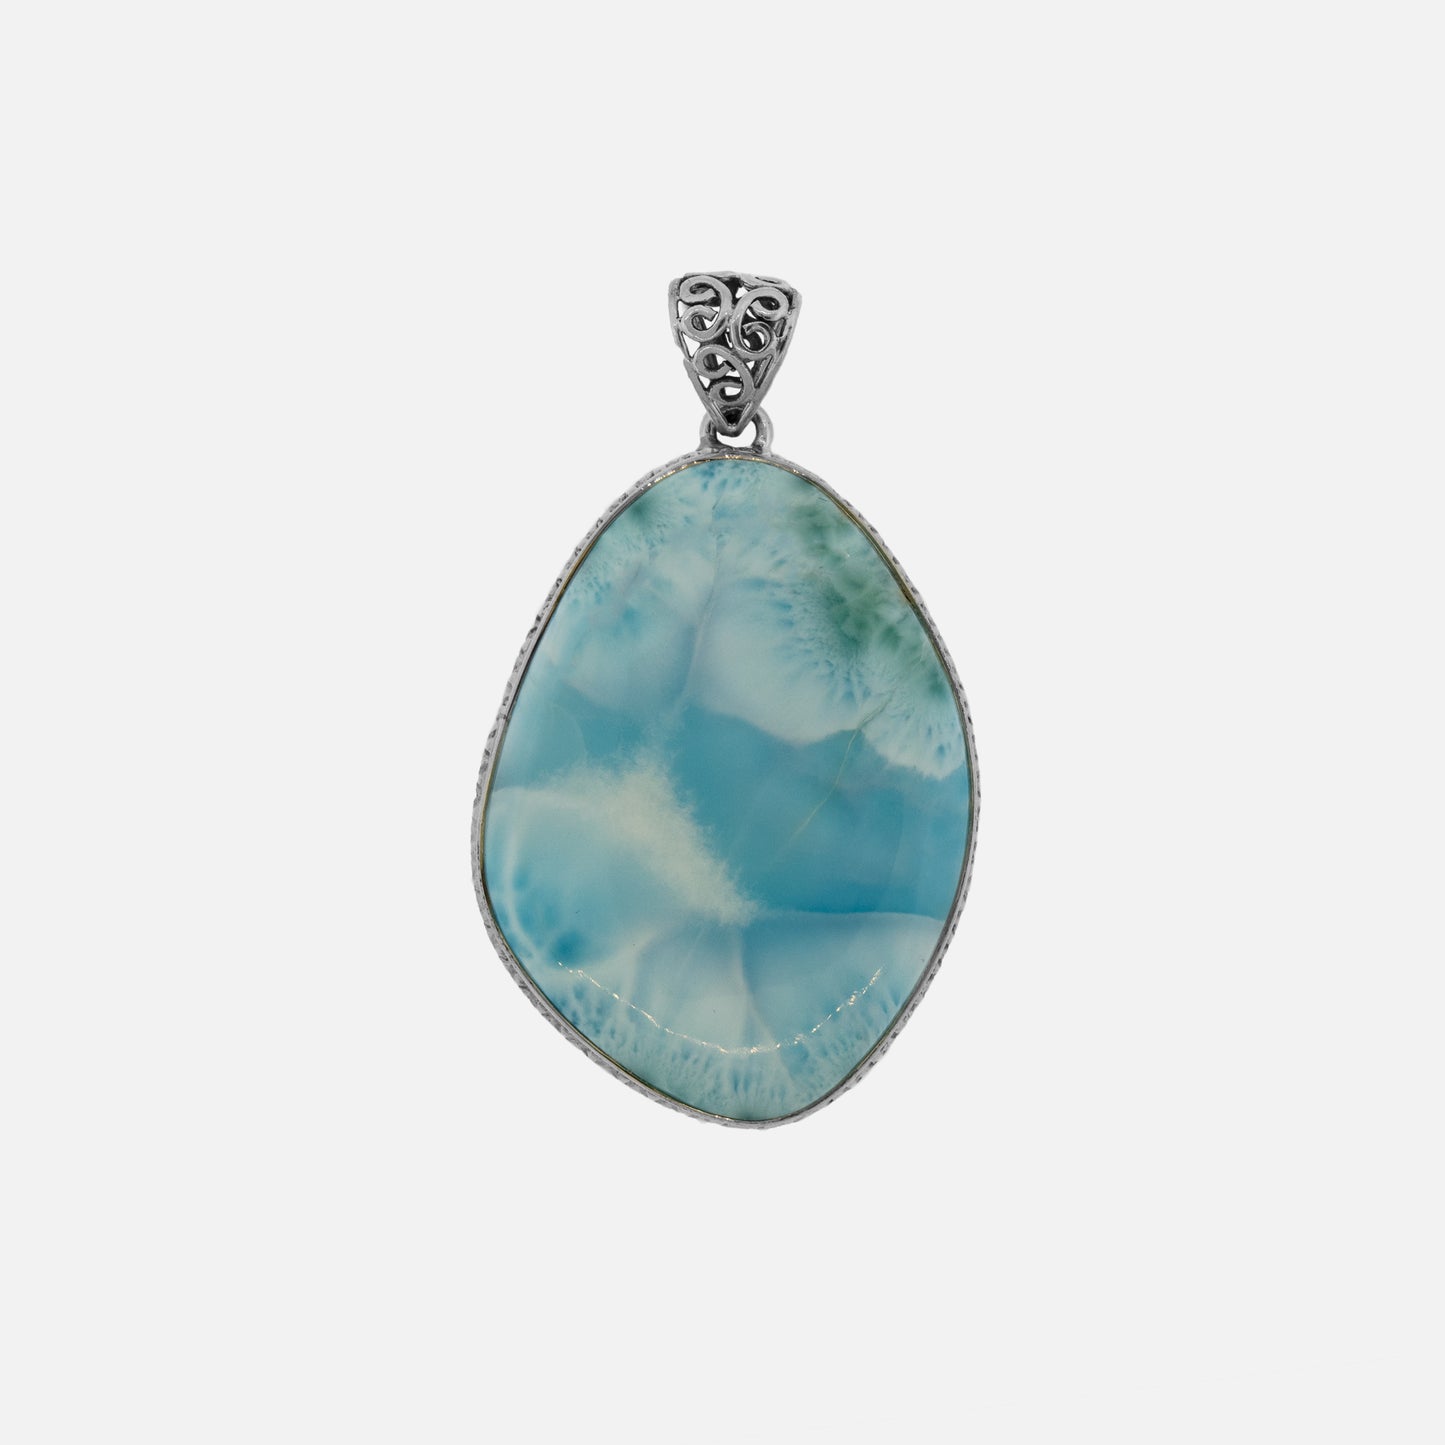 A Larger Larimar Pendant by Super Silver on a white background.